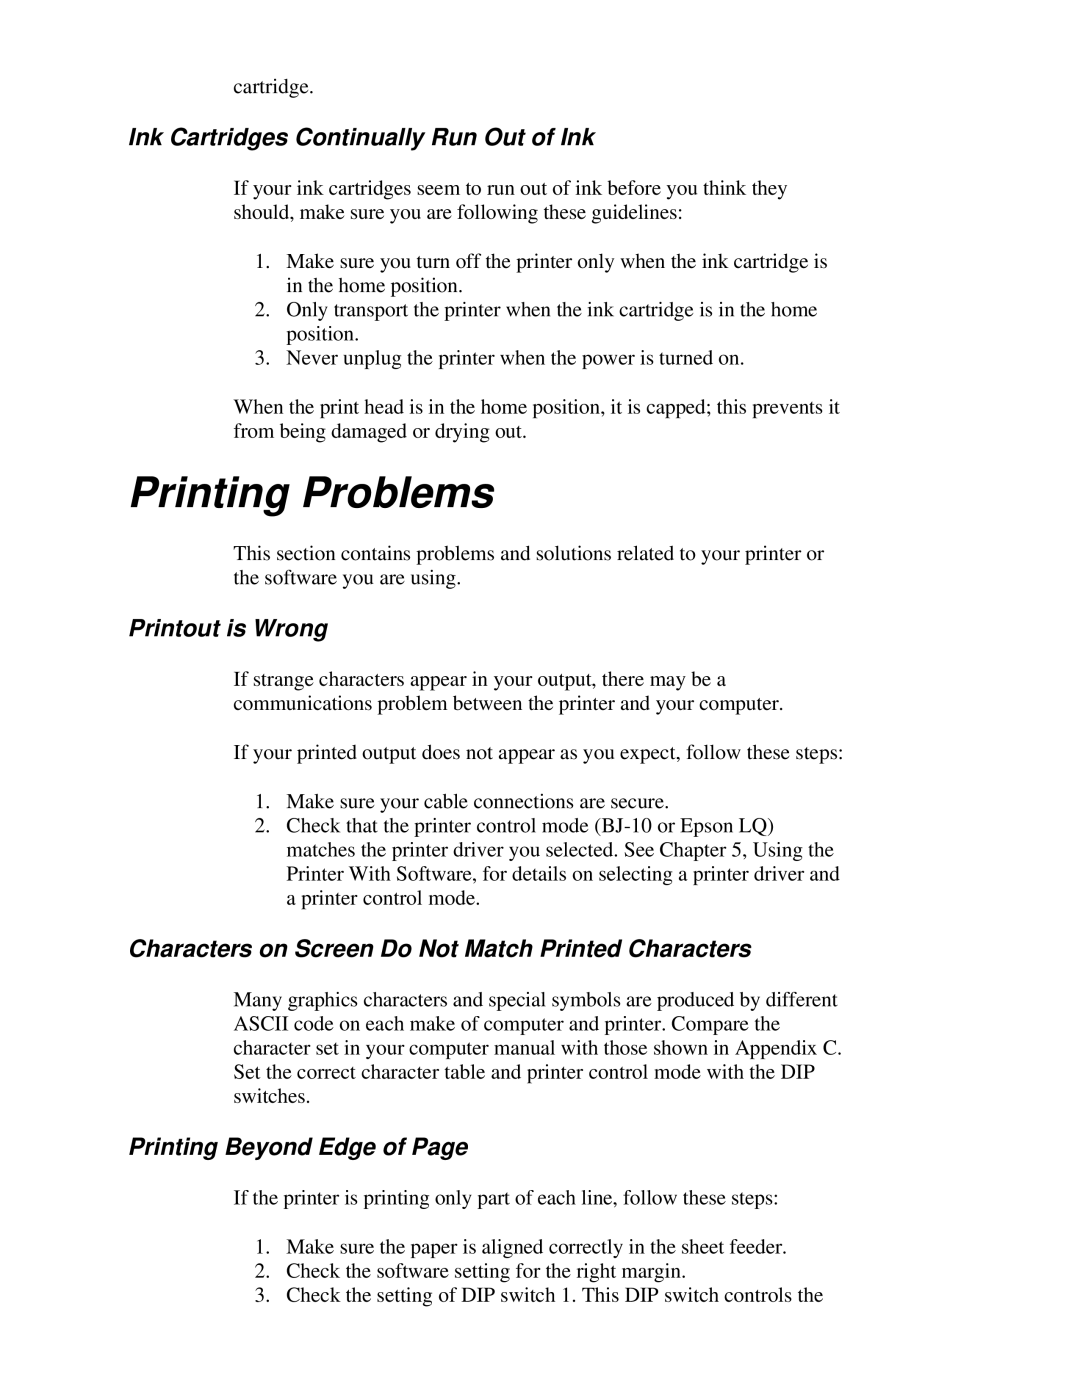 Canon BJ-230 Printing Problems, Ink Cartridges Continually Run Out of Ink, Printout is Wrong, Printing Beyond Edge of Page 